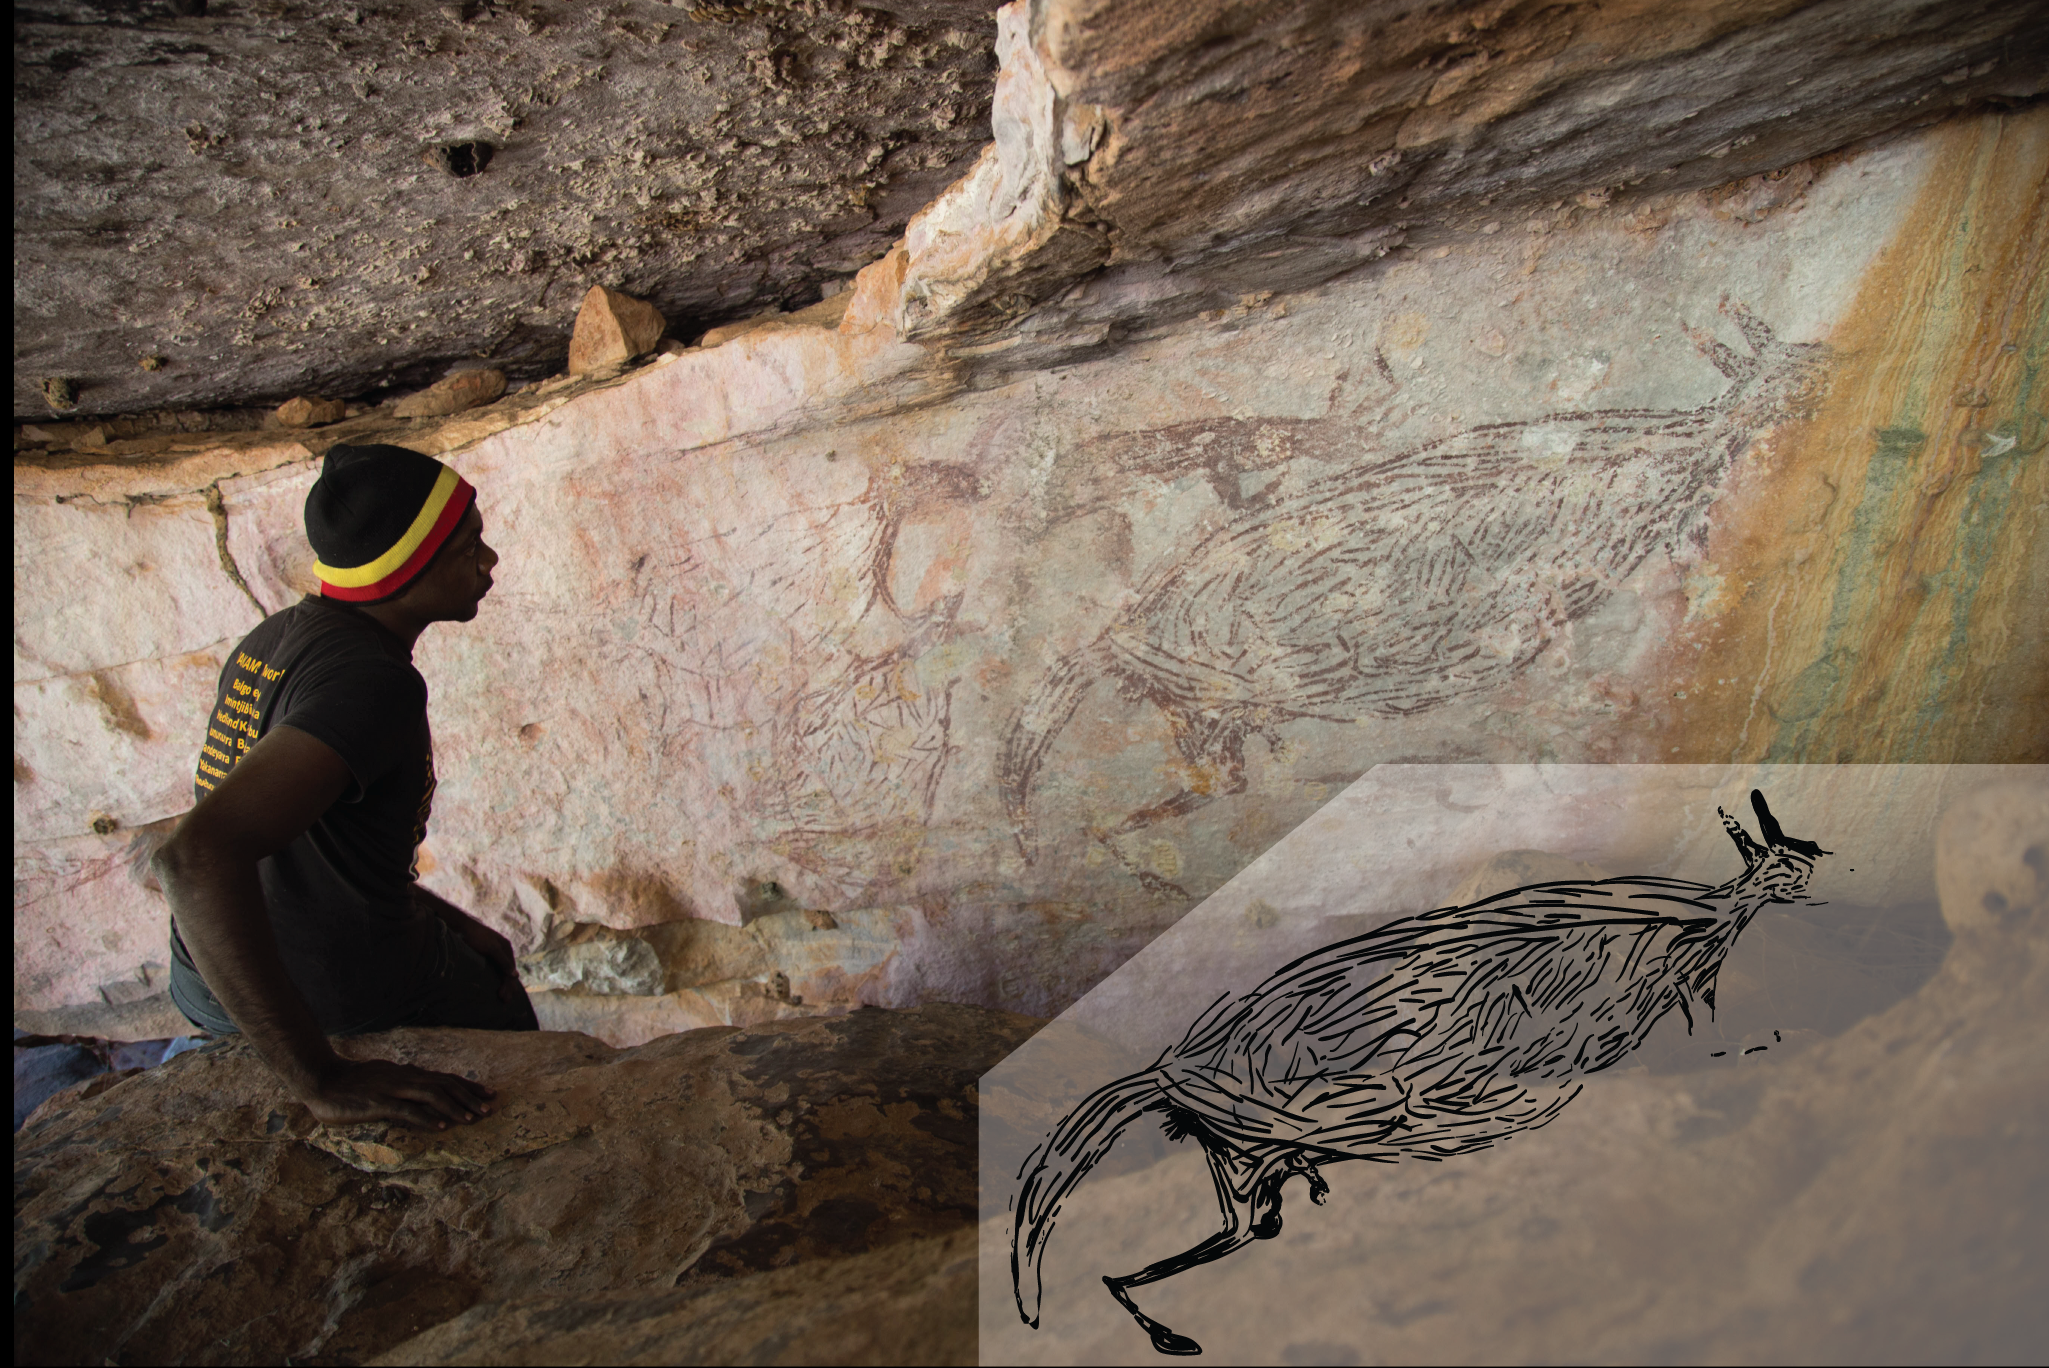 Traditional Owner Ian Waina inspecting a Naturalistic painting of a kangaroo, determined to be more than 12,700 years old based on the age of overlying mud wasp nests. The inset is an illustration of the painting above it. Photo: Peter Veth and the Balanggarra Aboriginal Corporation, Illustration: Pauline Heaney